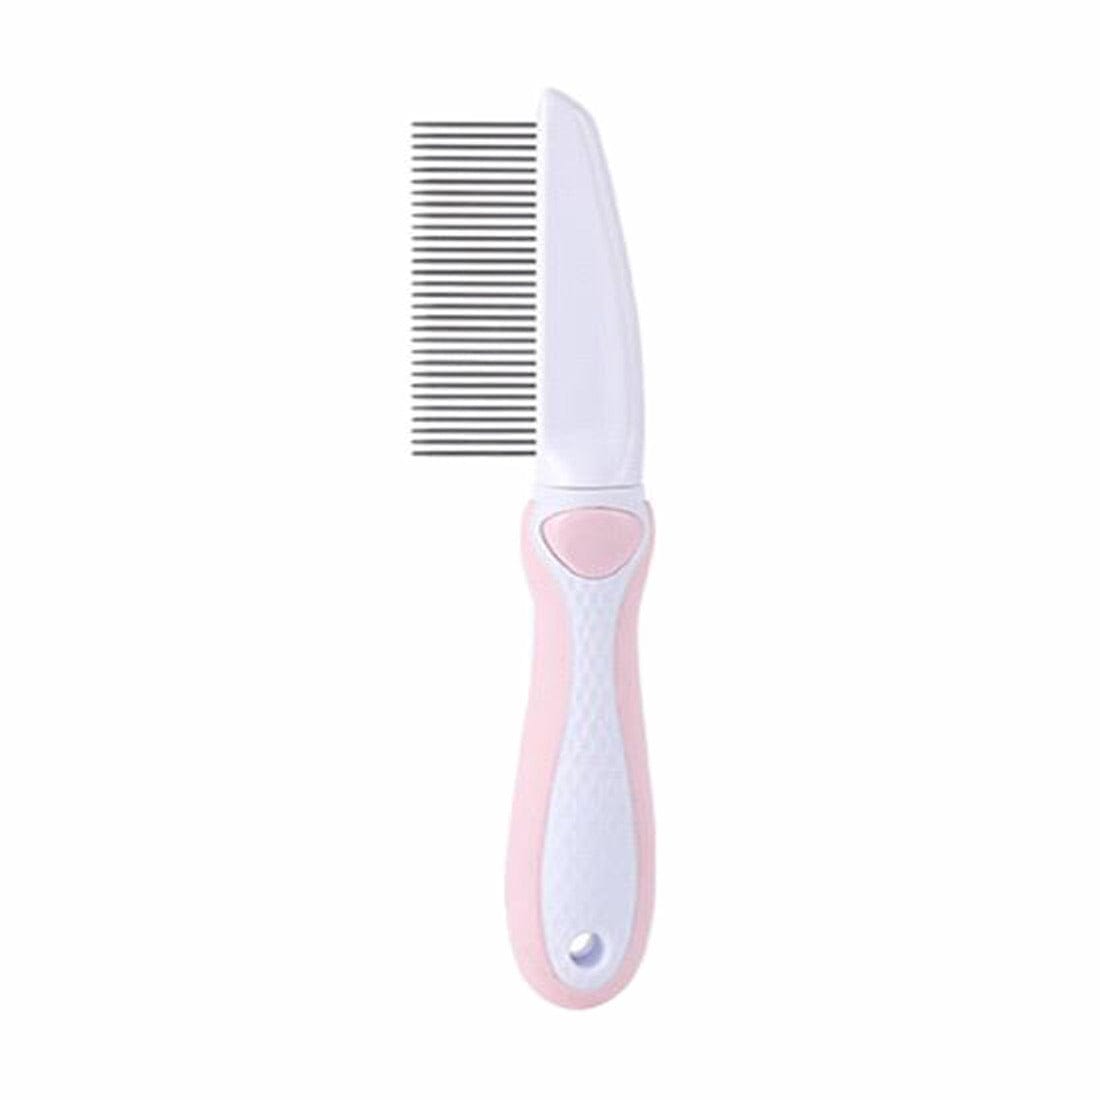 kutkutstyle Grooming KUTKUT Long Teeth Detangling Pet Comb | Stainless Steel Grooming Comb | Removes Tangles, Mats, Shed Hair, and Dirt - Ideal for Everyday Use On Dogs and Cats with Short Or Long Hair